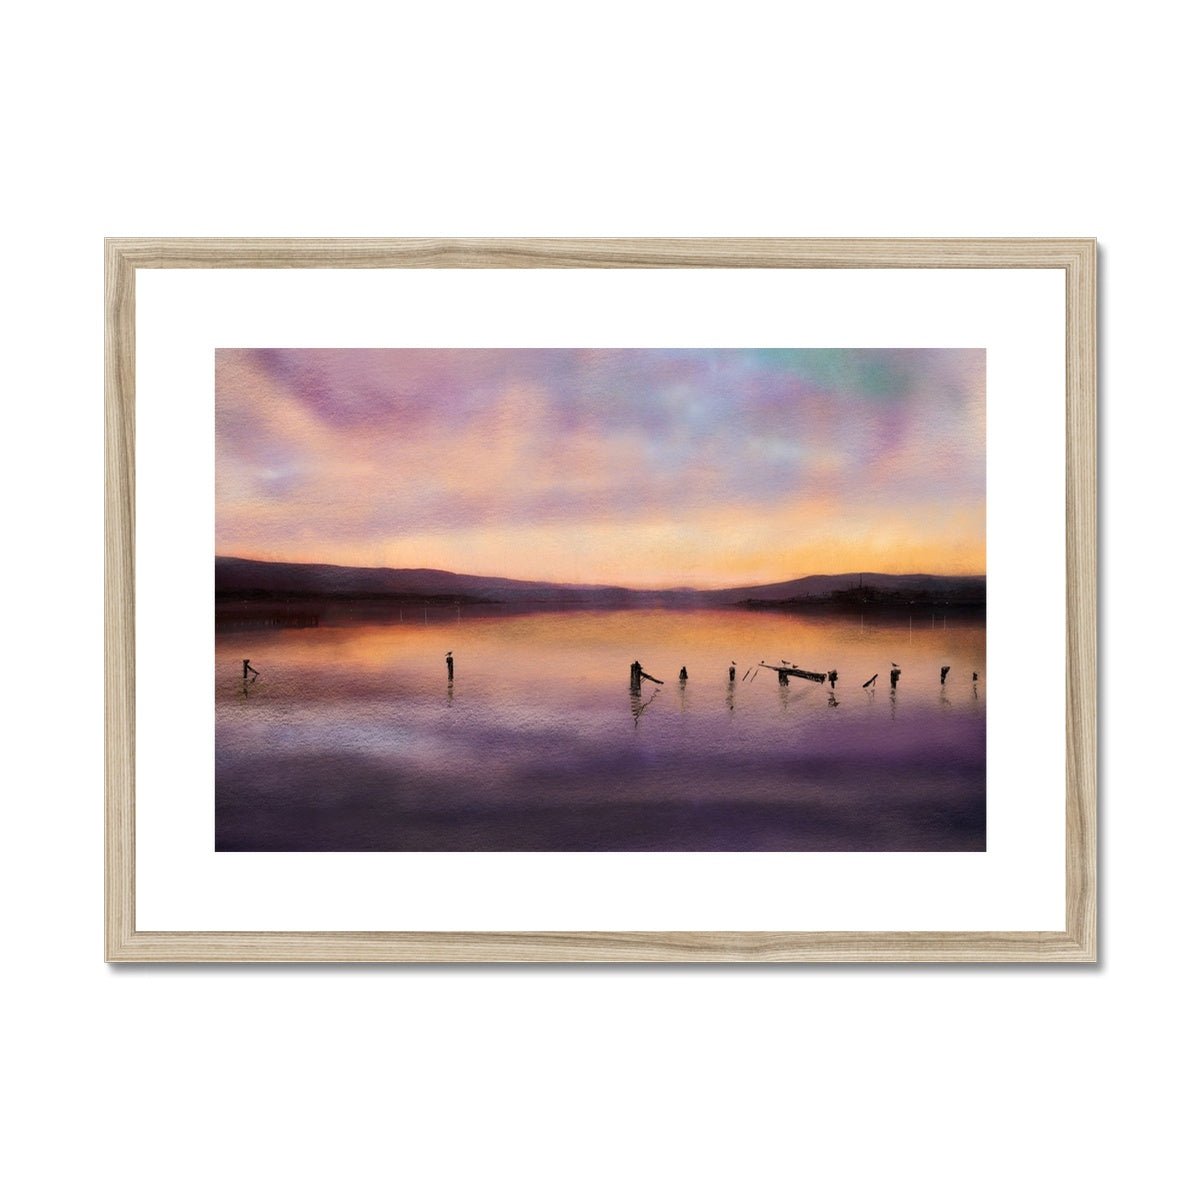 Admiralty Jetty Dusk Painting | Framed & Mounted Prints From Scotland-Framed & Mounted Prints-River Clyde Art Gallery-A2 Landscape-Natural Frame-Paintings, Prints, Homeware, Art Gifts From Scotland By Scottish Artist Kevin Hunter